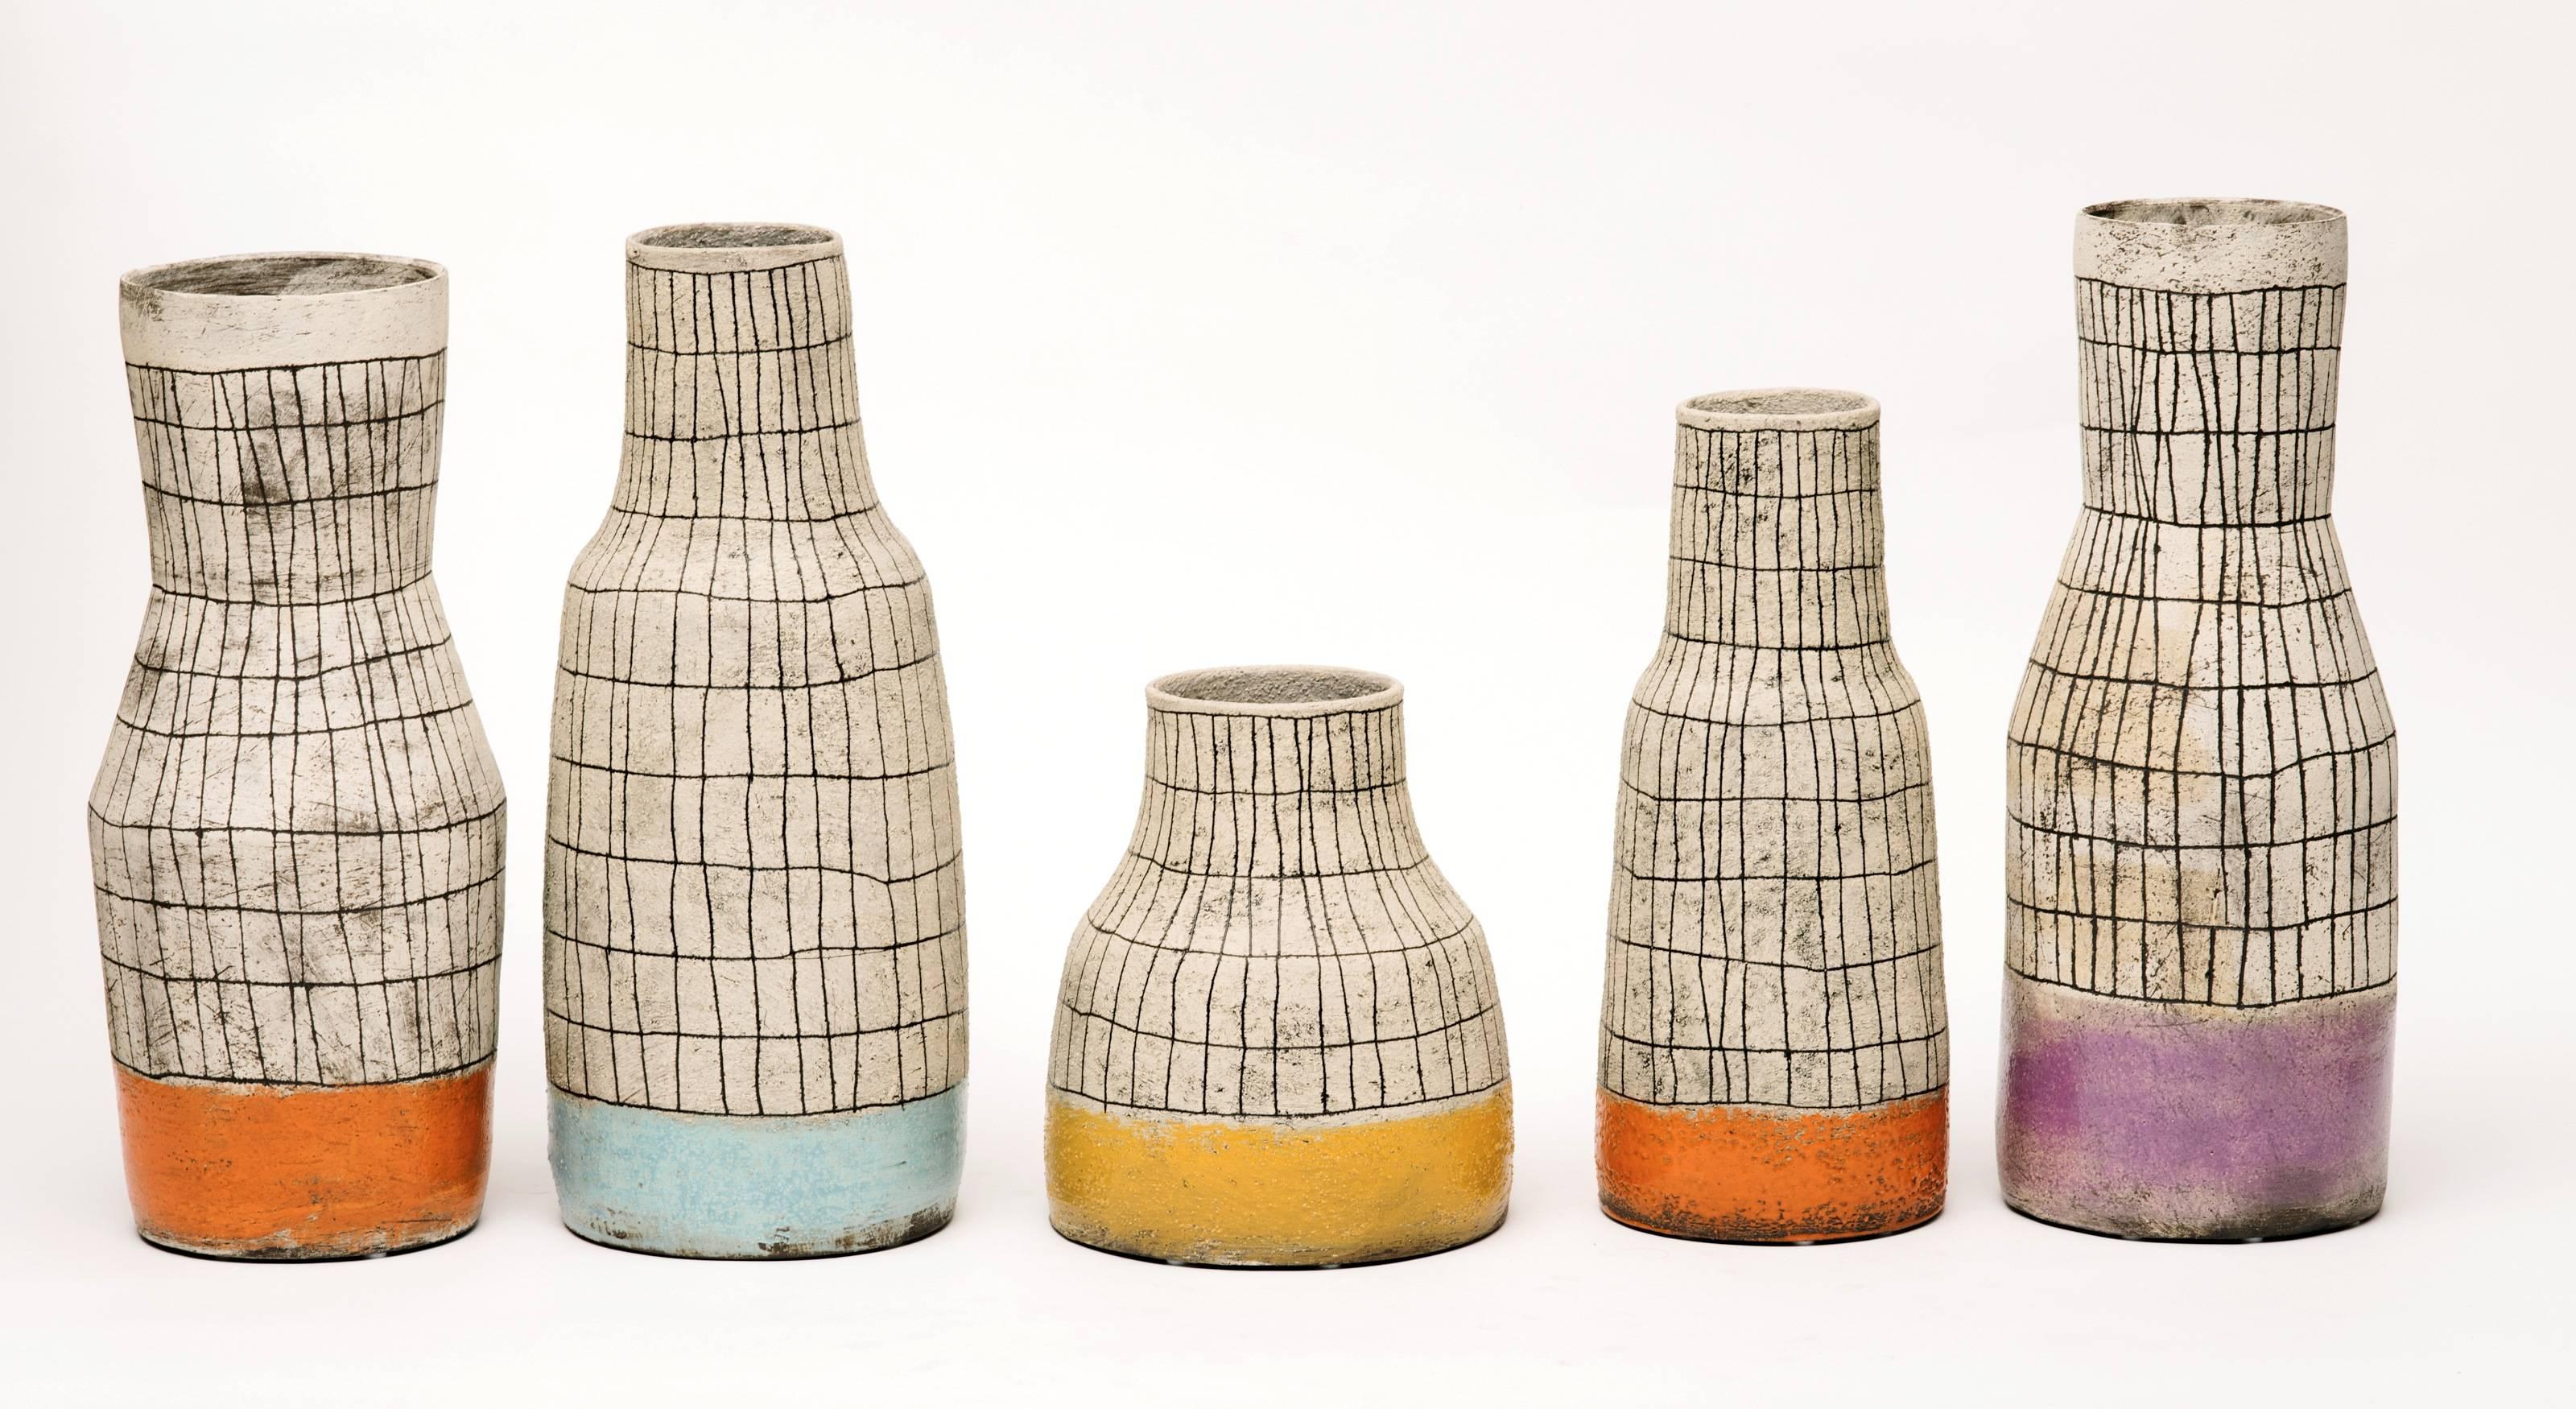 Glazed Contemporary Hand-Painted Ceramic Vases with a Mid Century Design